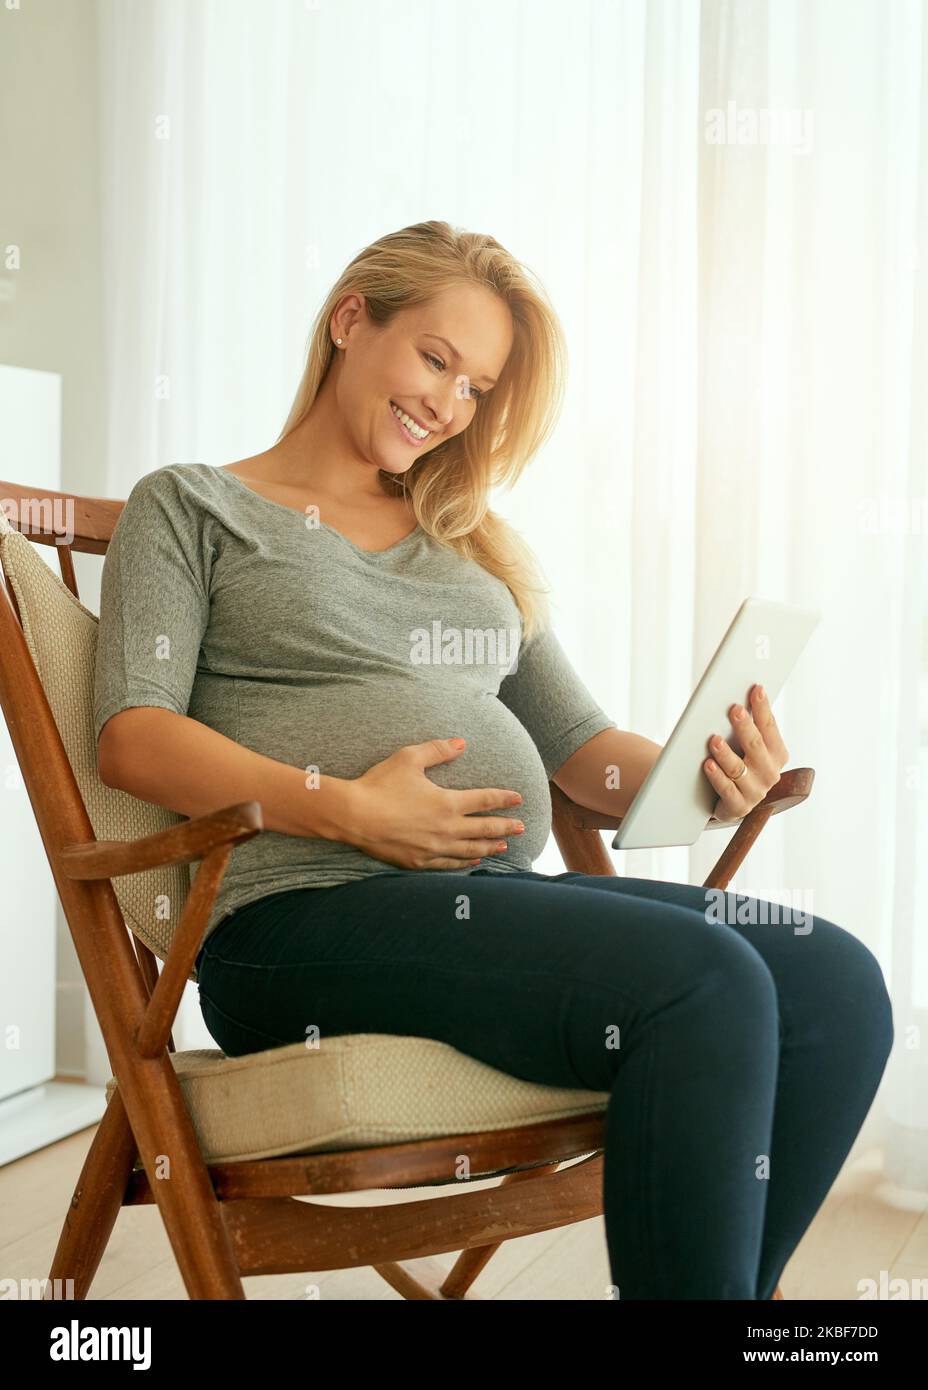 Creating my own pregnancy slideshow. a pregnant woman using her digital tablet while sitting on a rocking chair. Stock Photo